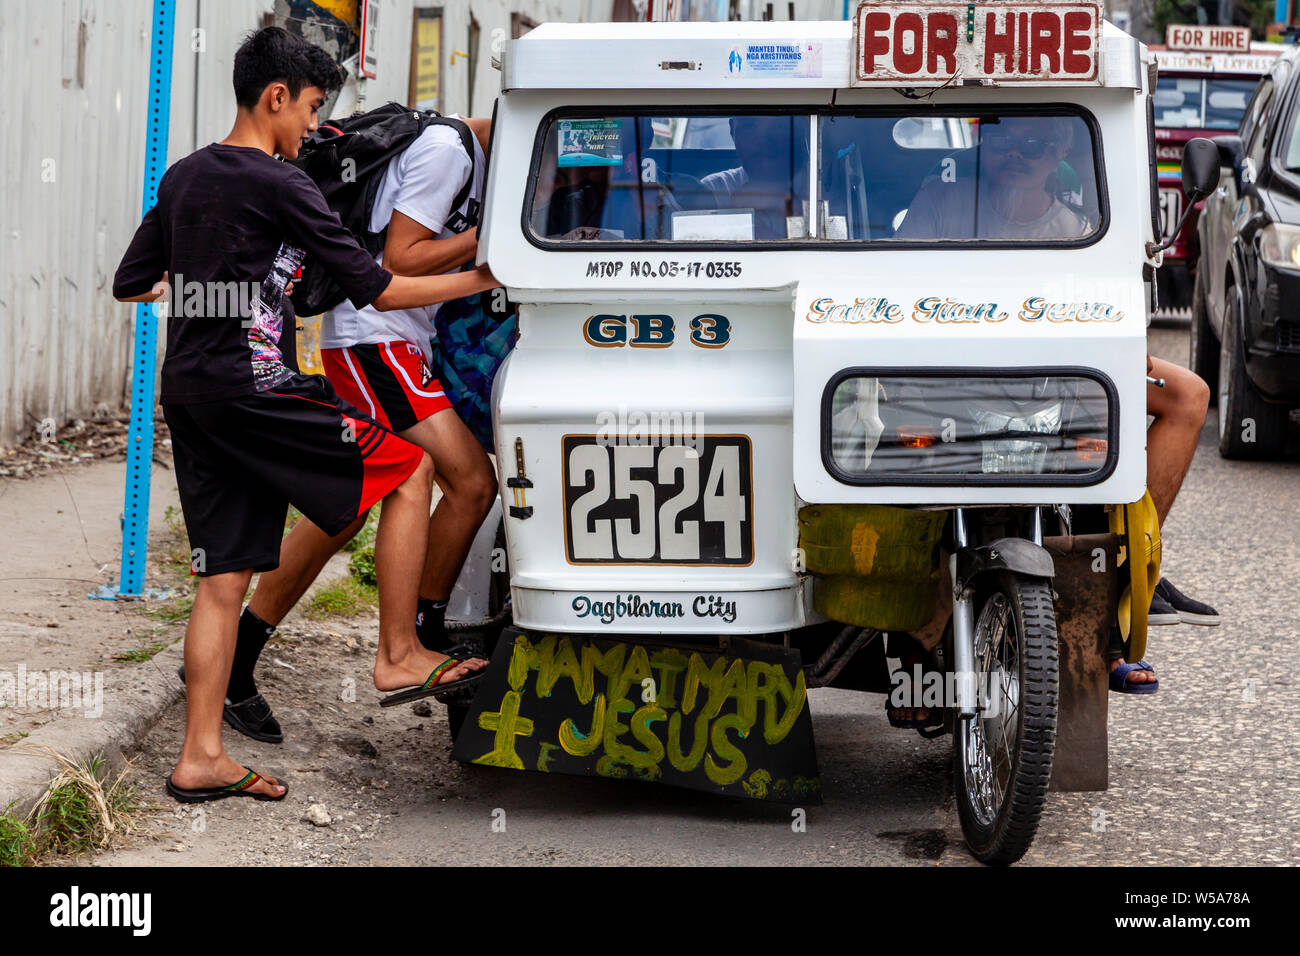 Local People Getting Into A Tricycle, Tagbilaran City, Bohol, The Philippines Stock Photo